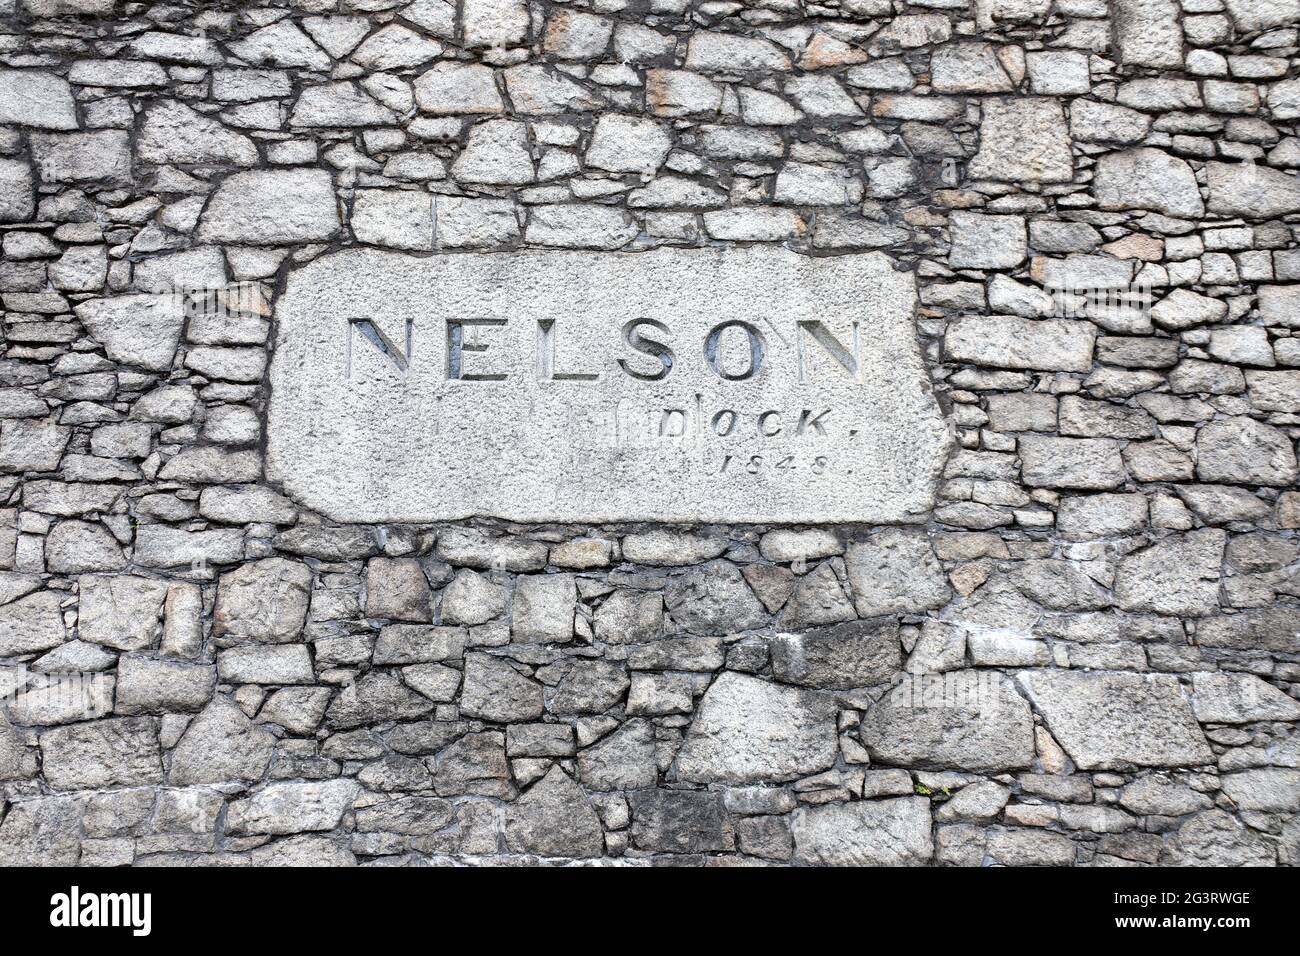 Nelson Dock 1848 sign in Liverpool Stock Photo